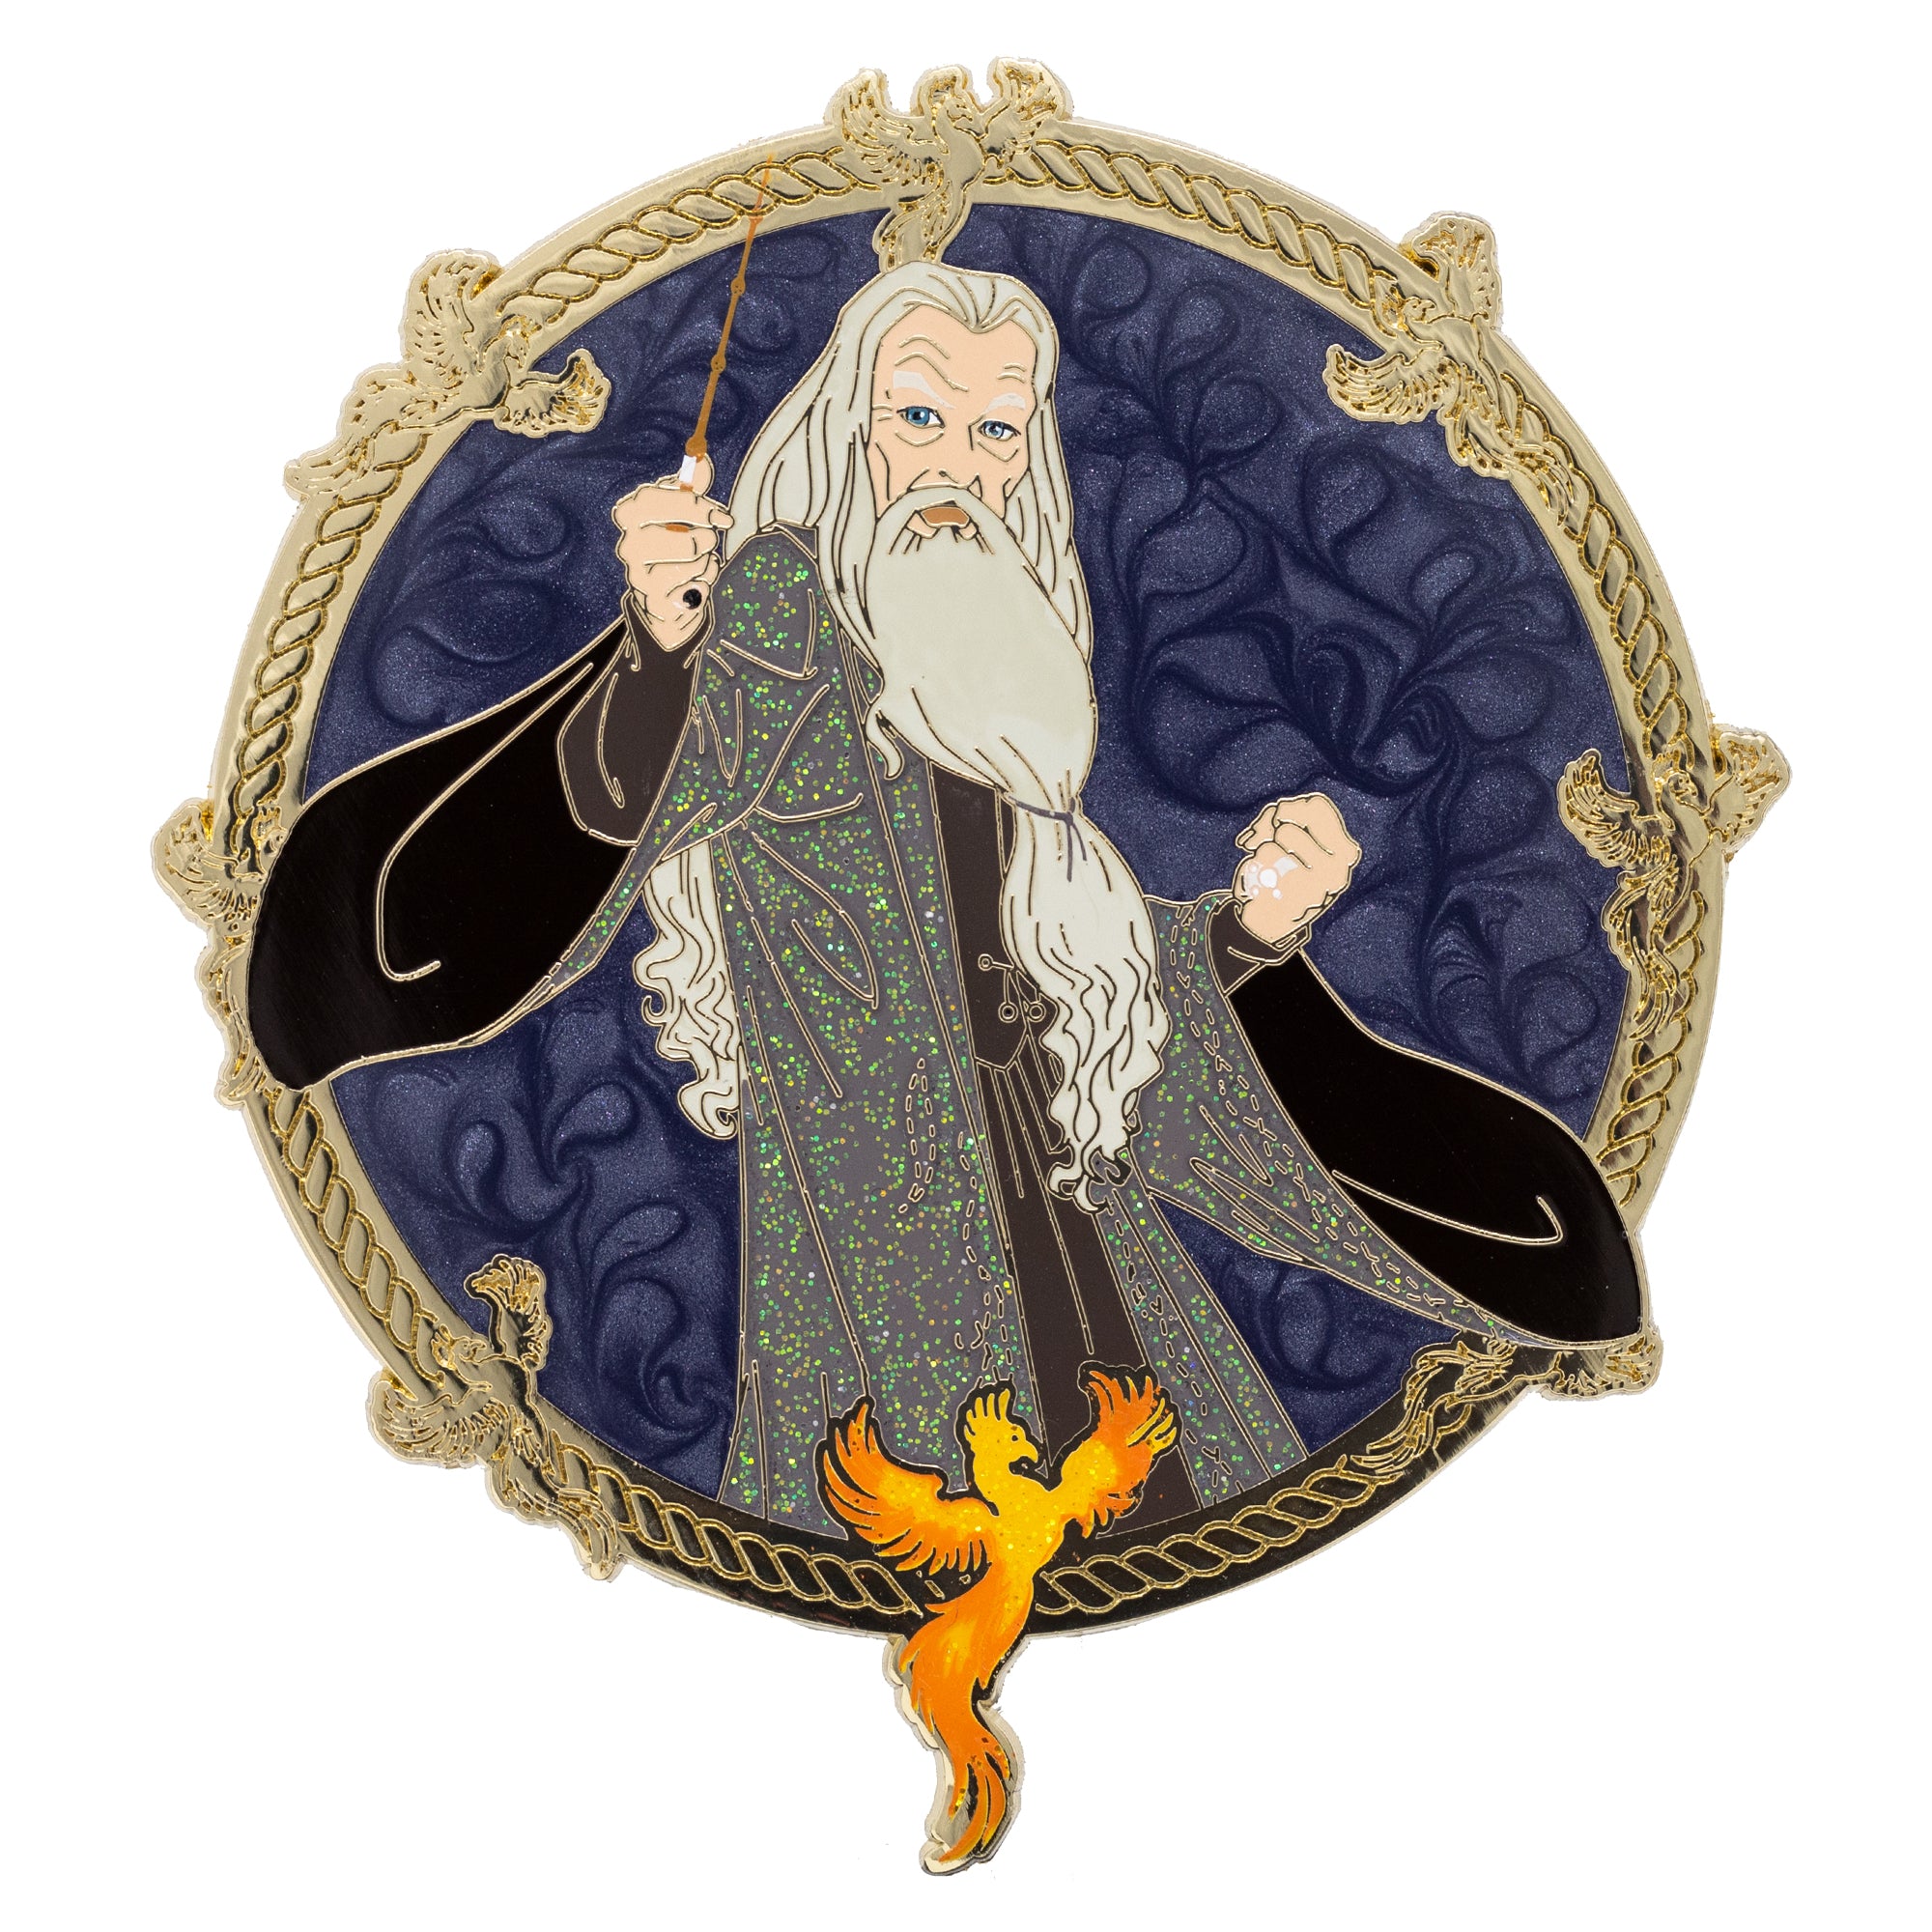 Harry Potter Iconic Series - Albus Dumbledore 3" Limited Edition 300 - FINALESALE